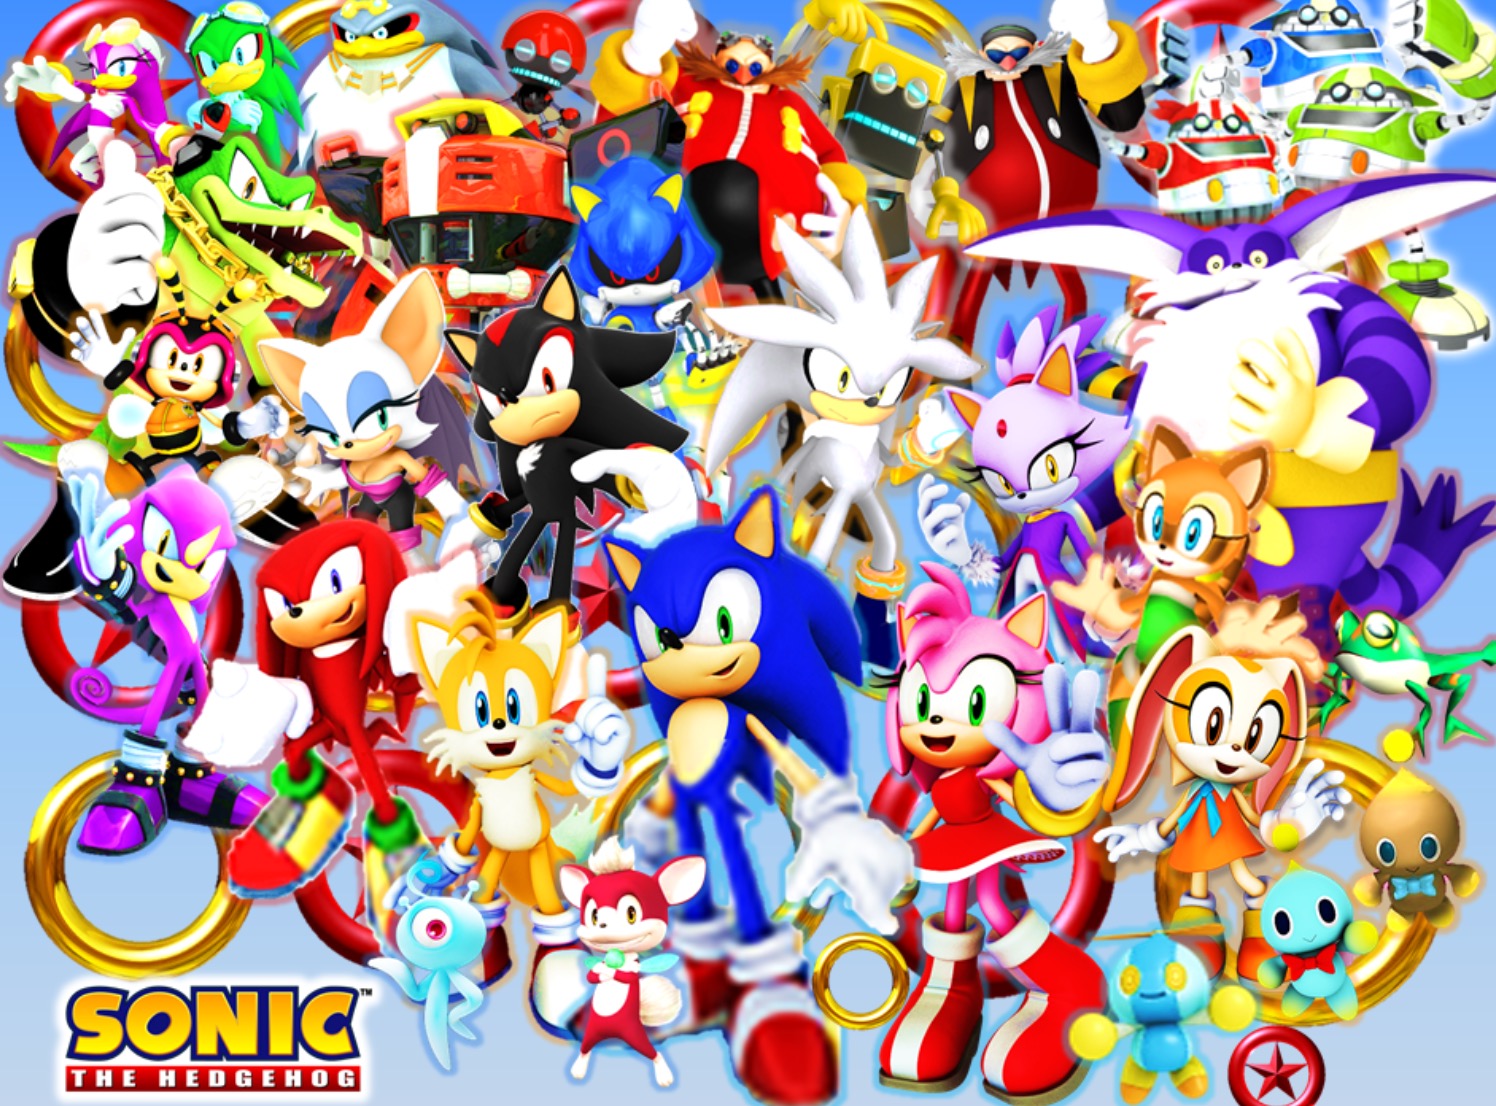 Am I the only one who enjoys all the Sonic characters/ why does the